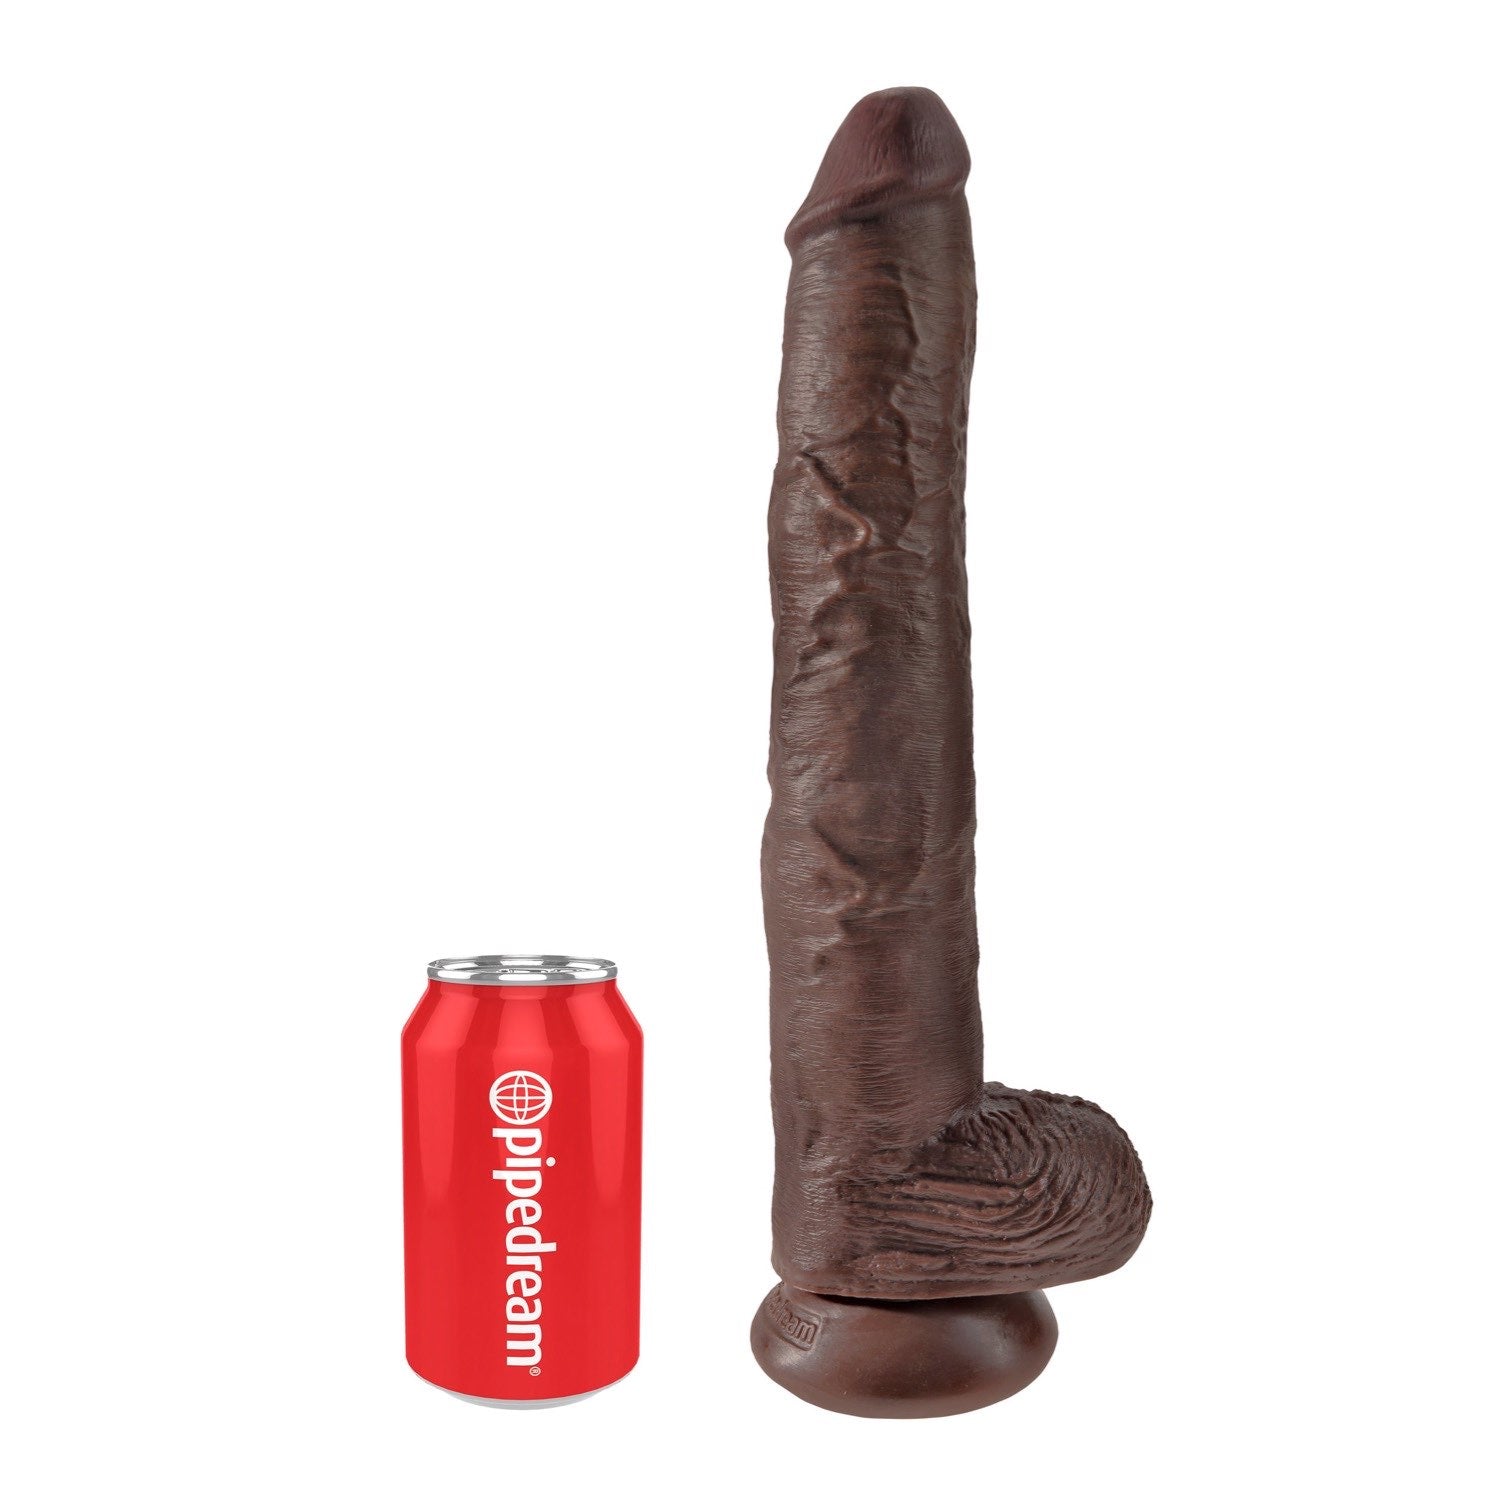 King Cock 14IN Cock with Balls - Brown by Pipedream